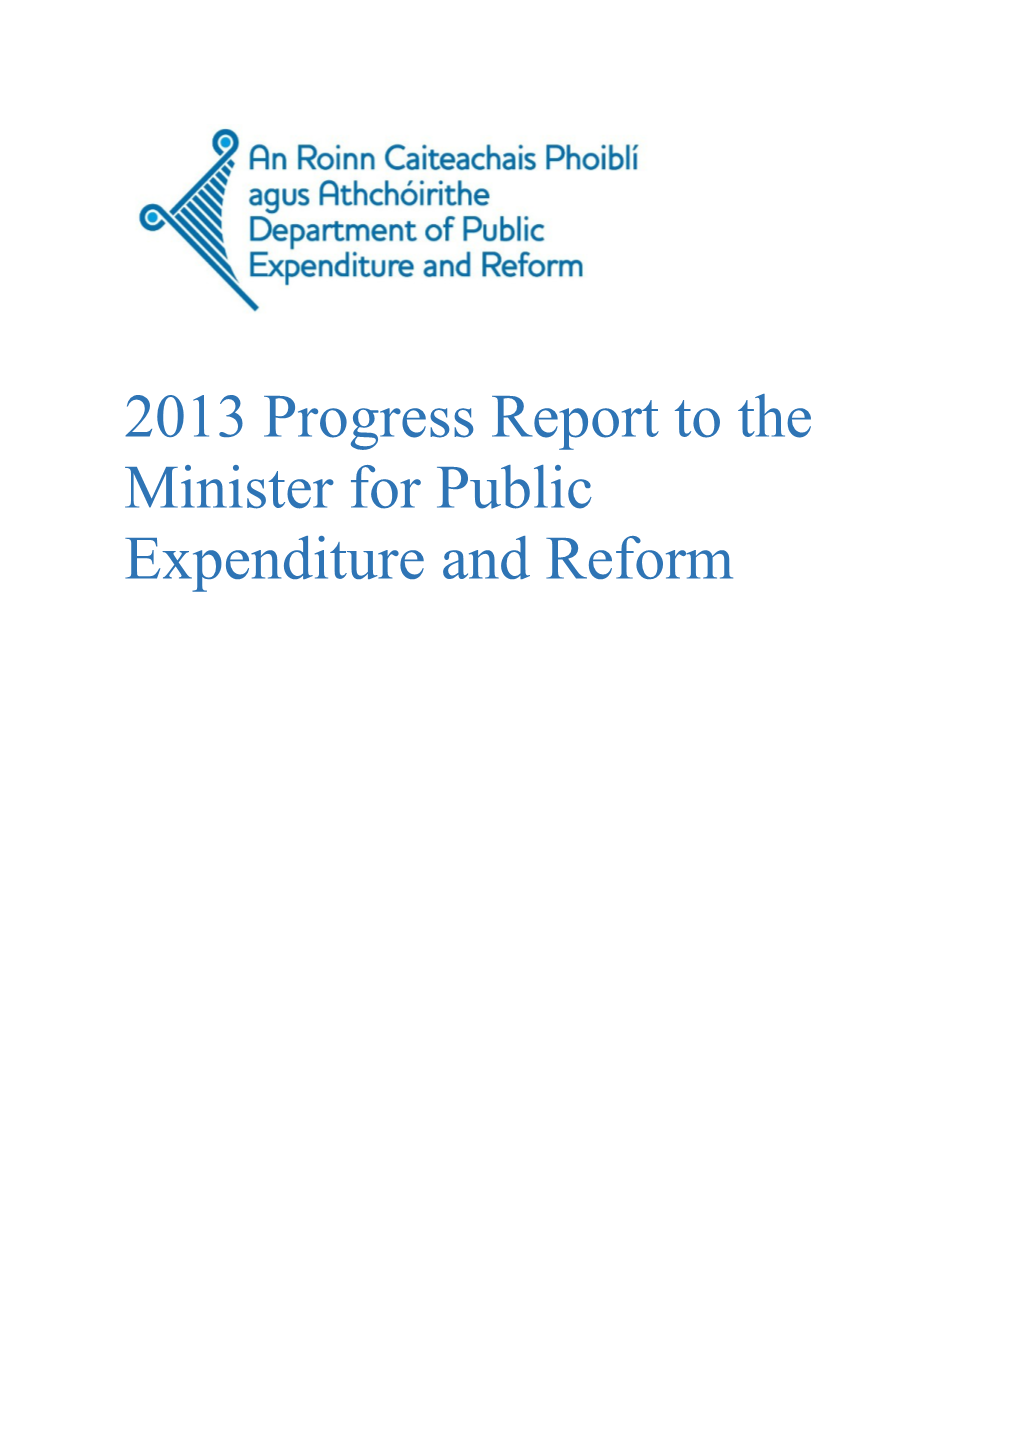 2013 Progress Report to the Minister for Public Expenditure and Reform